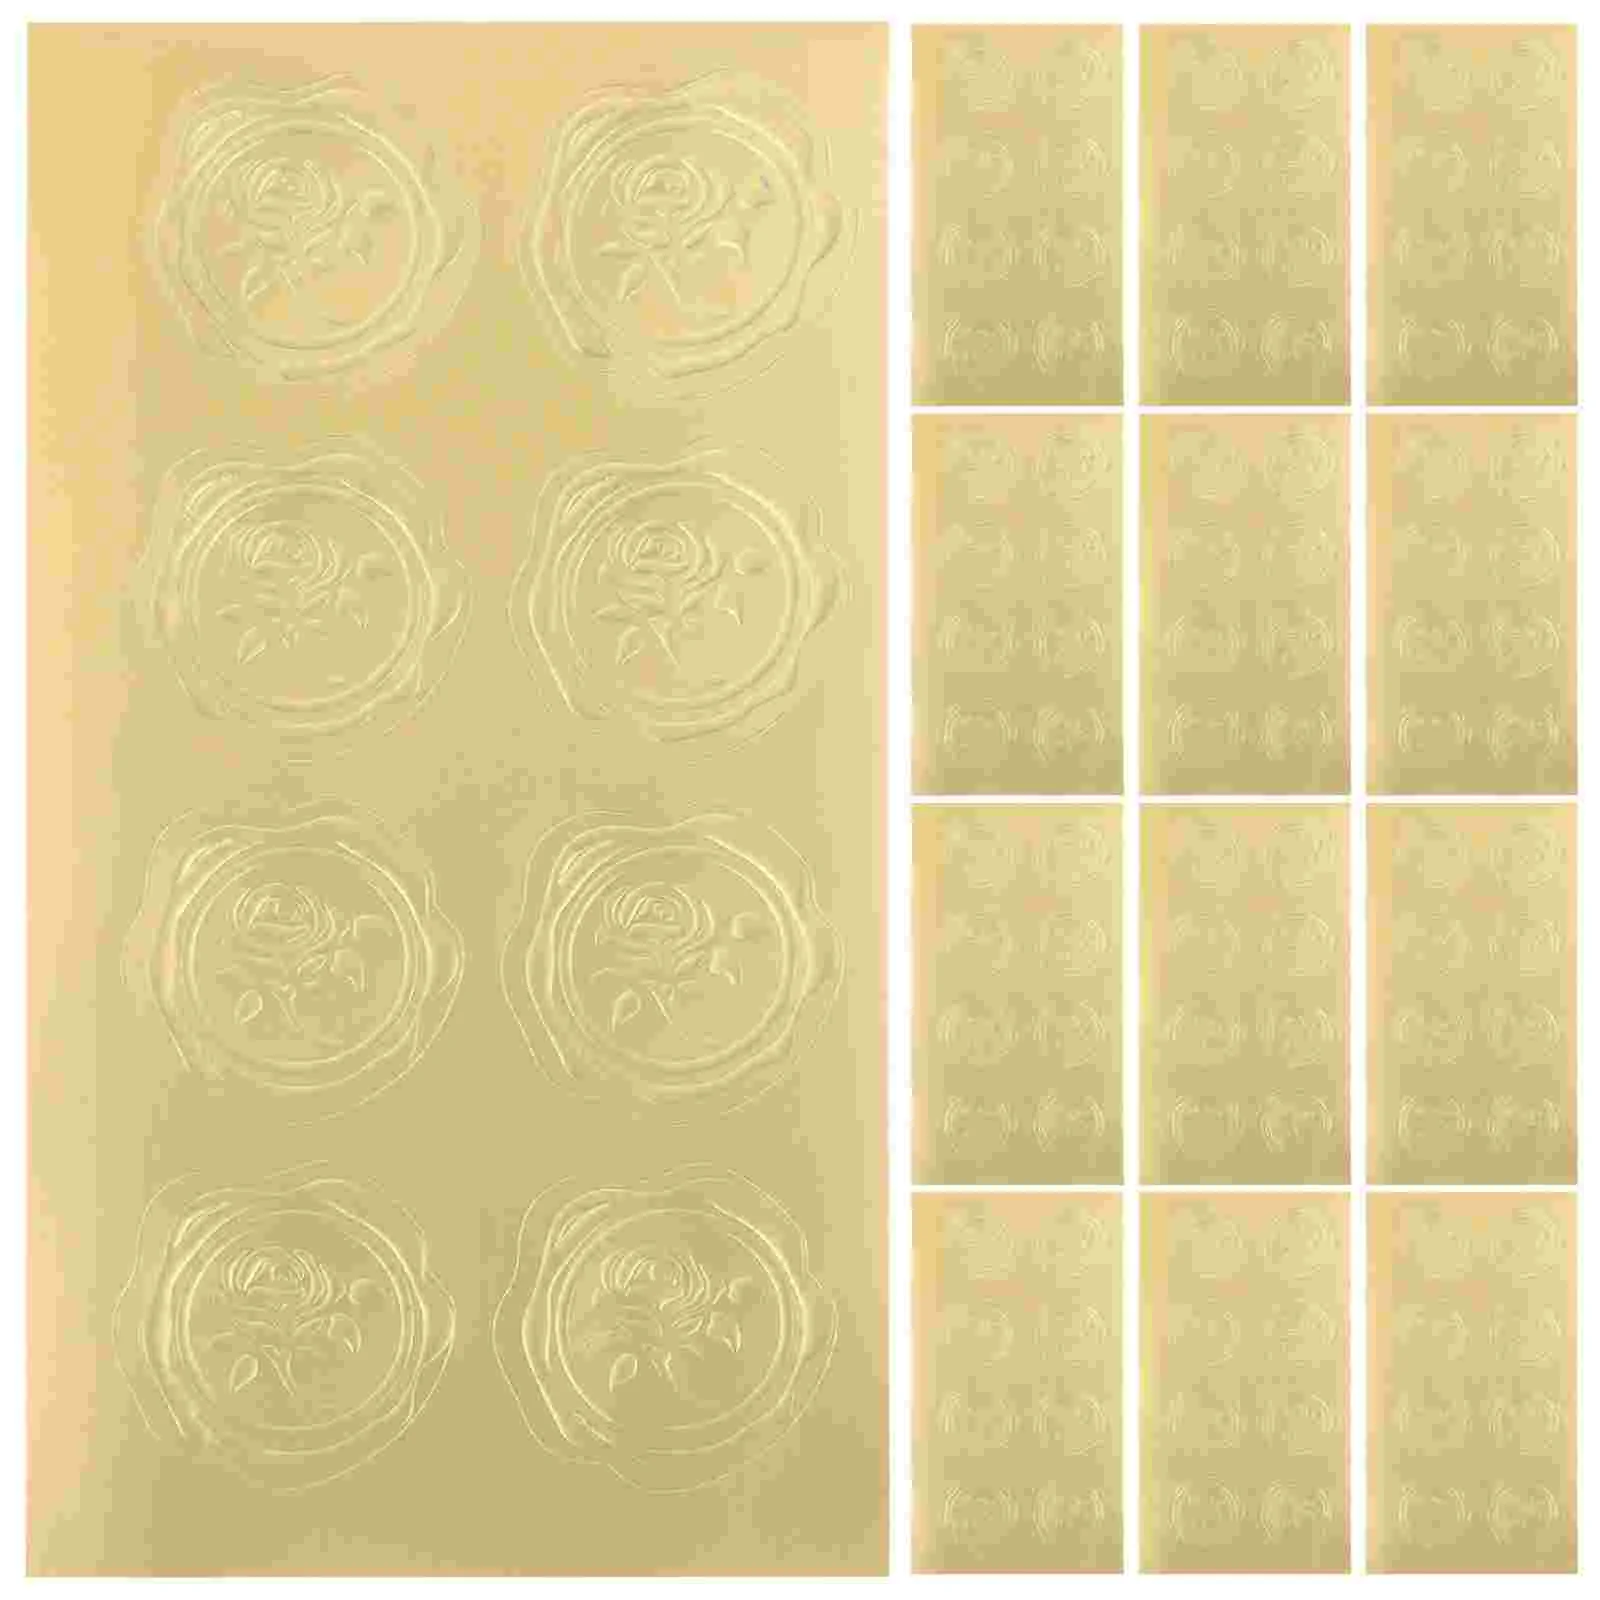 20 Sheets Self-adhesive Sealing Label Stickers Relief Designed Stickers Envelope Seal Stickers